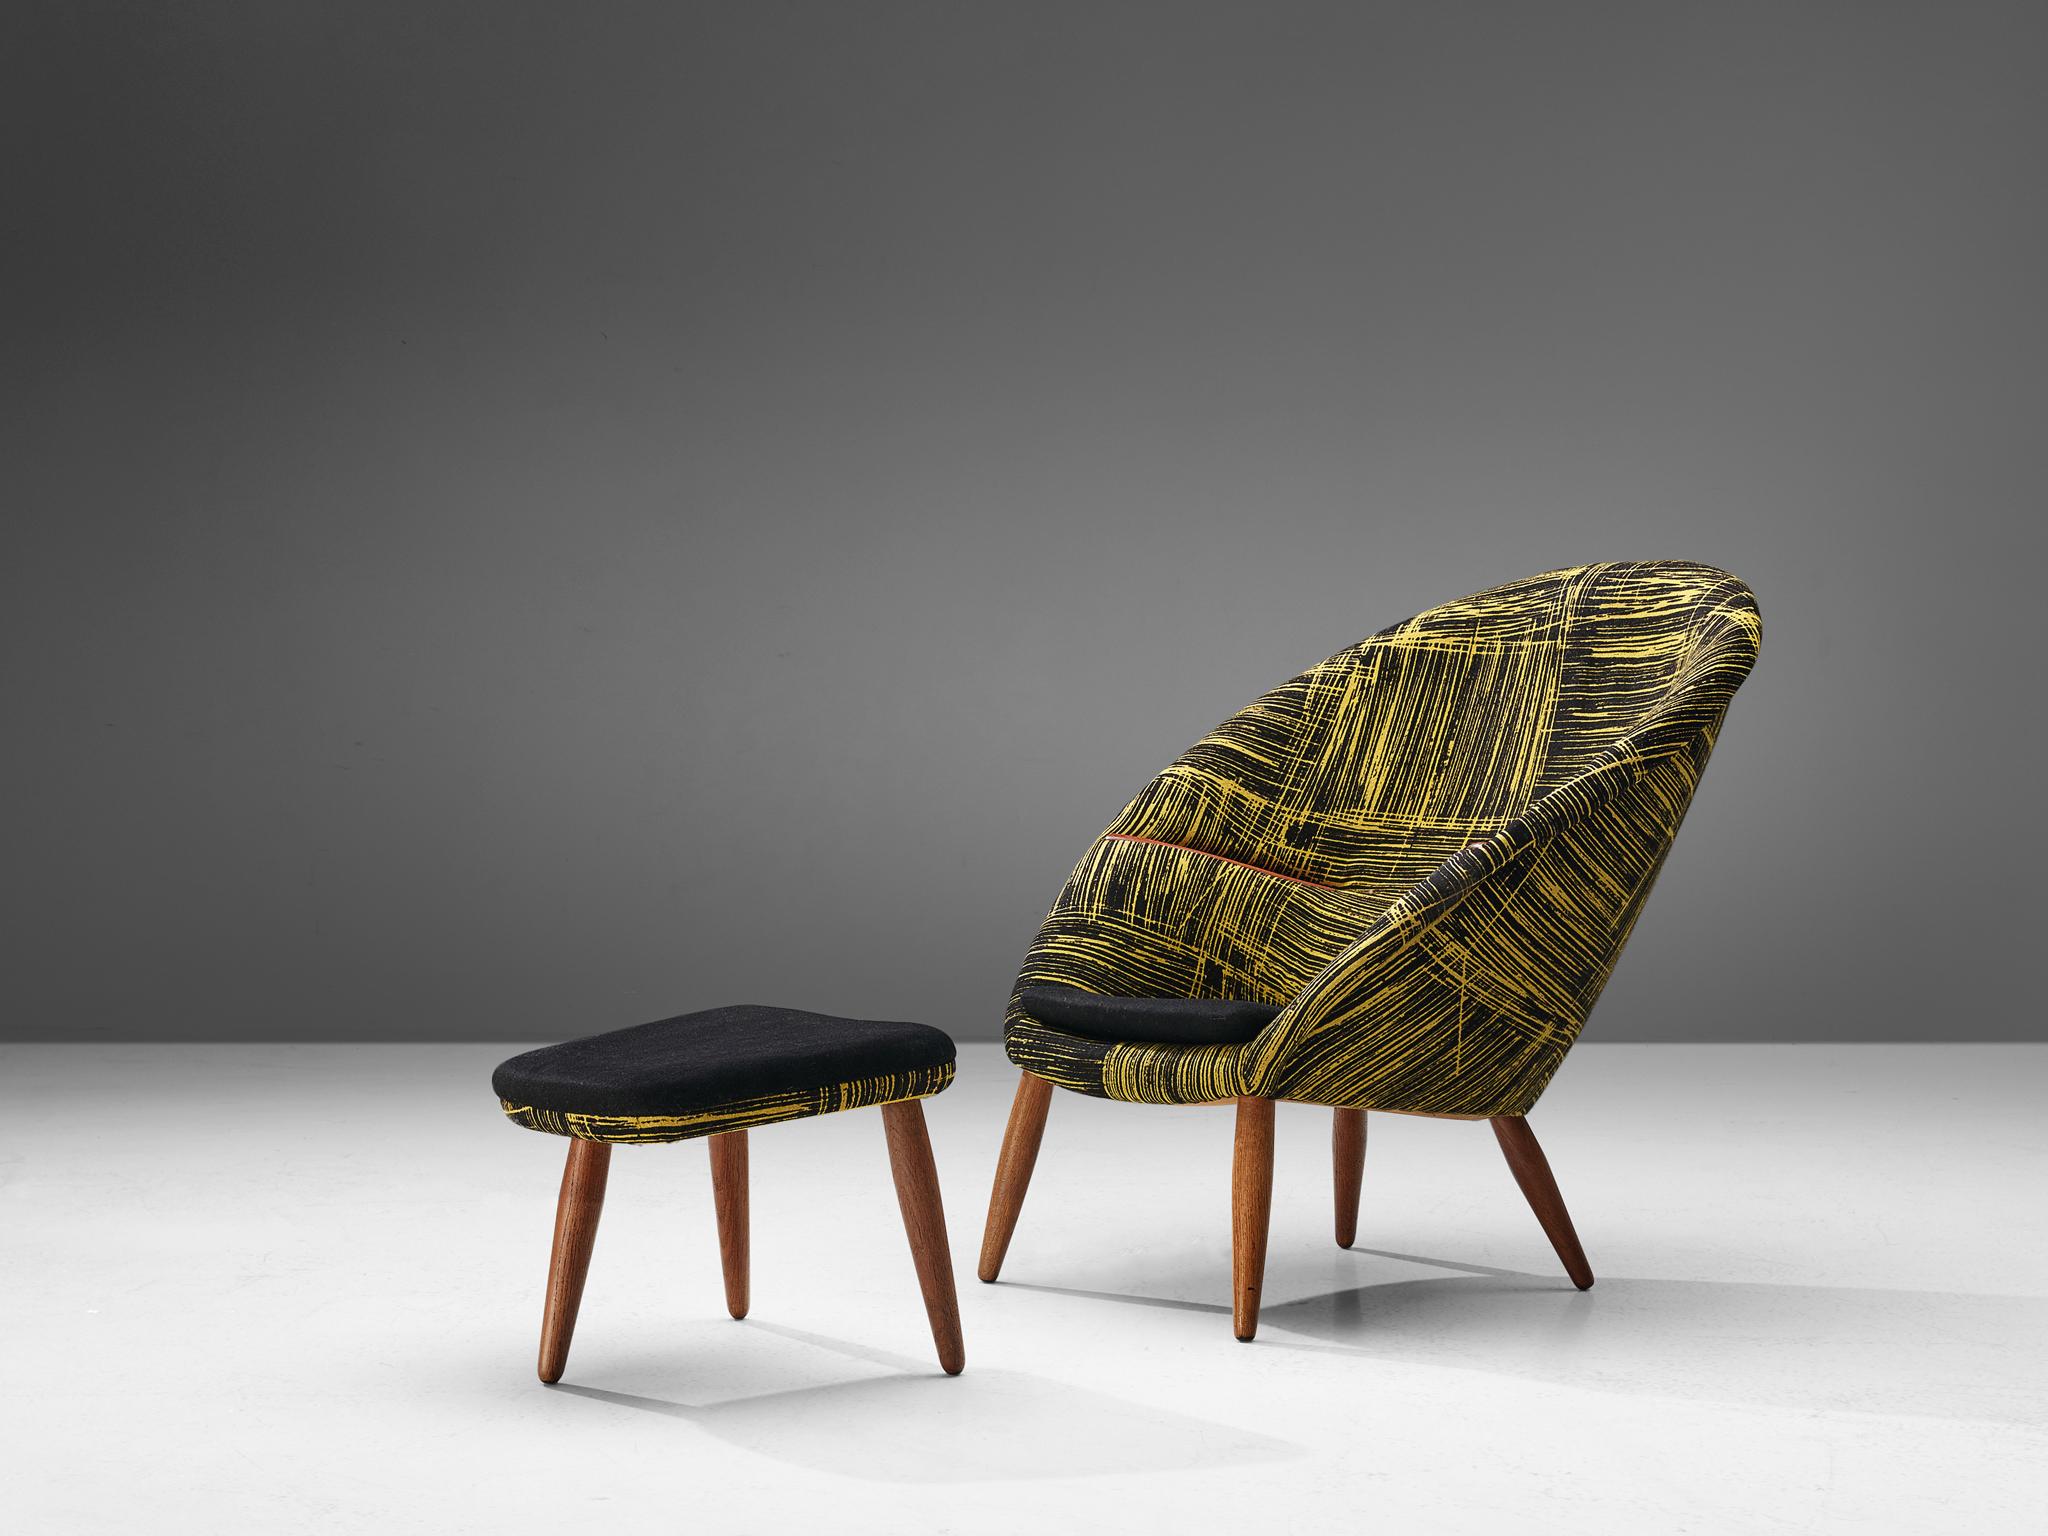 Arnold Madsen for Madsen & Schubell, Easy chair 'MS9' with stool, teak armrests with oak legs, upholstered in the original yellow and black wool, Denmark, 1950s.

This round and comfortable lounge chair is designed by Arnold Madsen for Madsen &